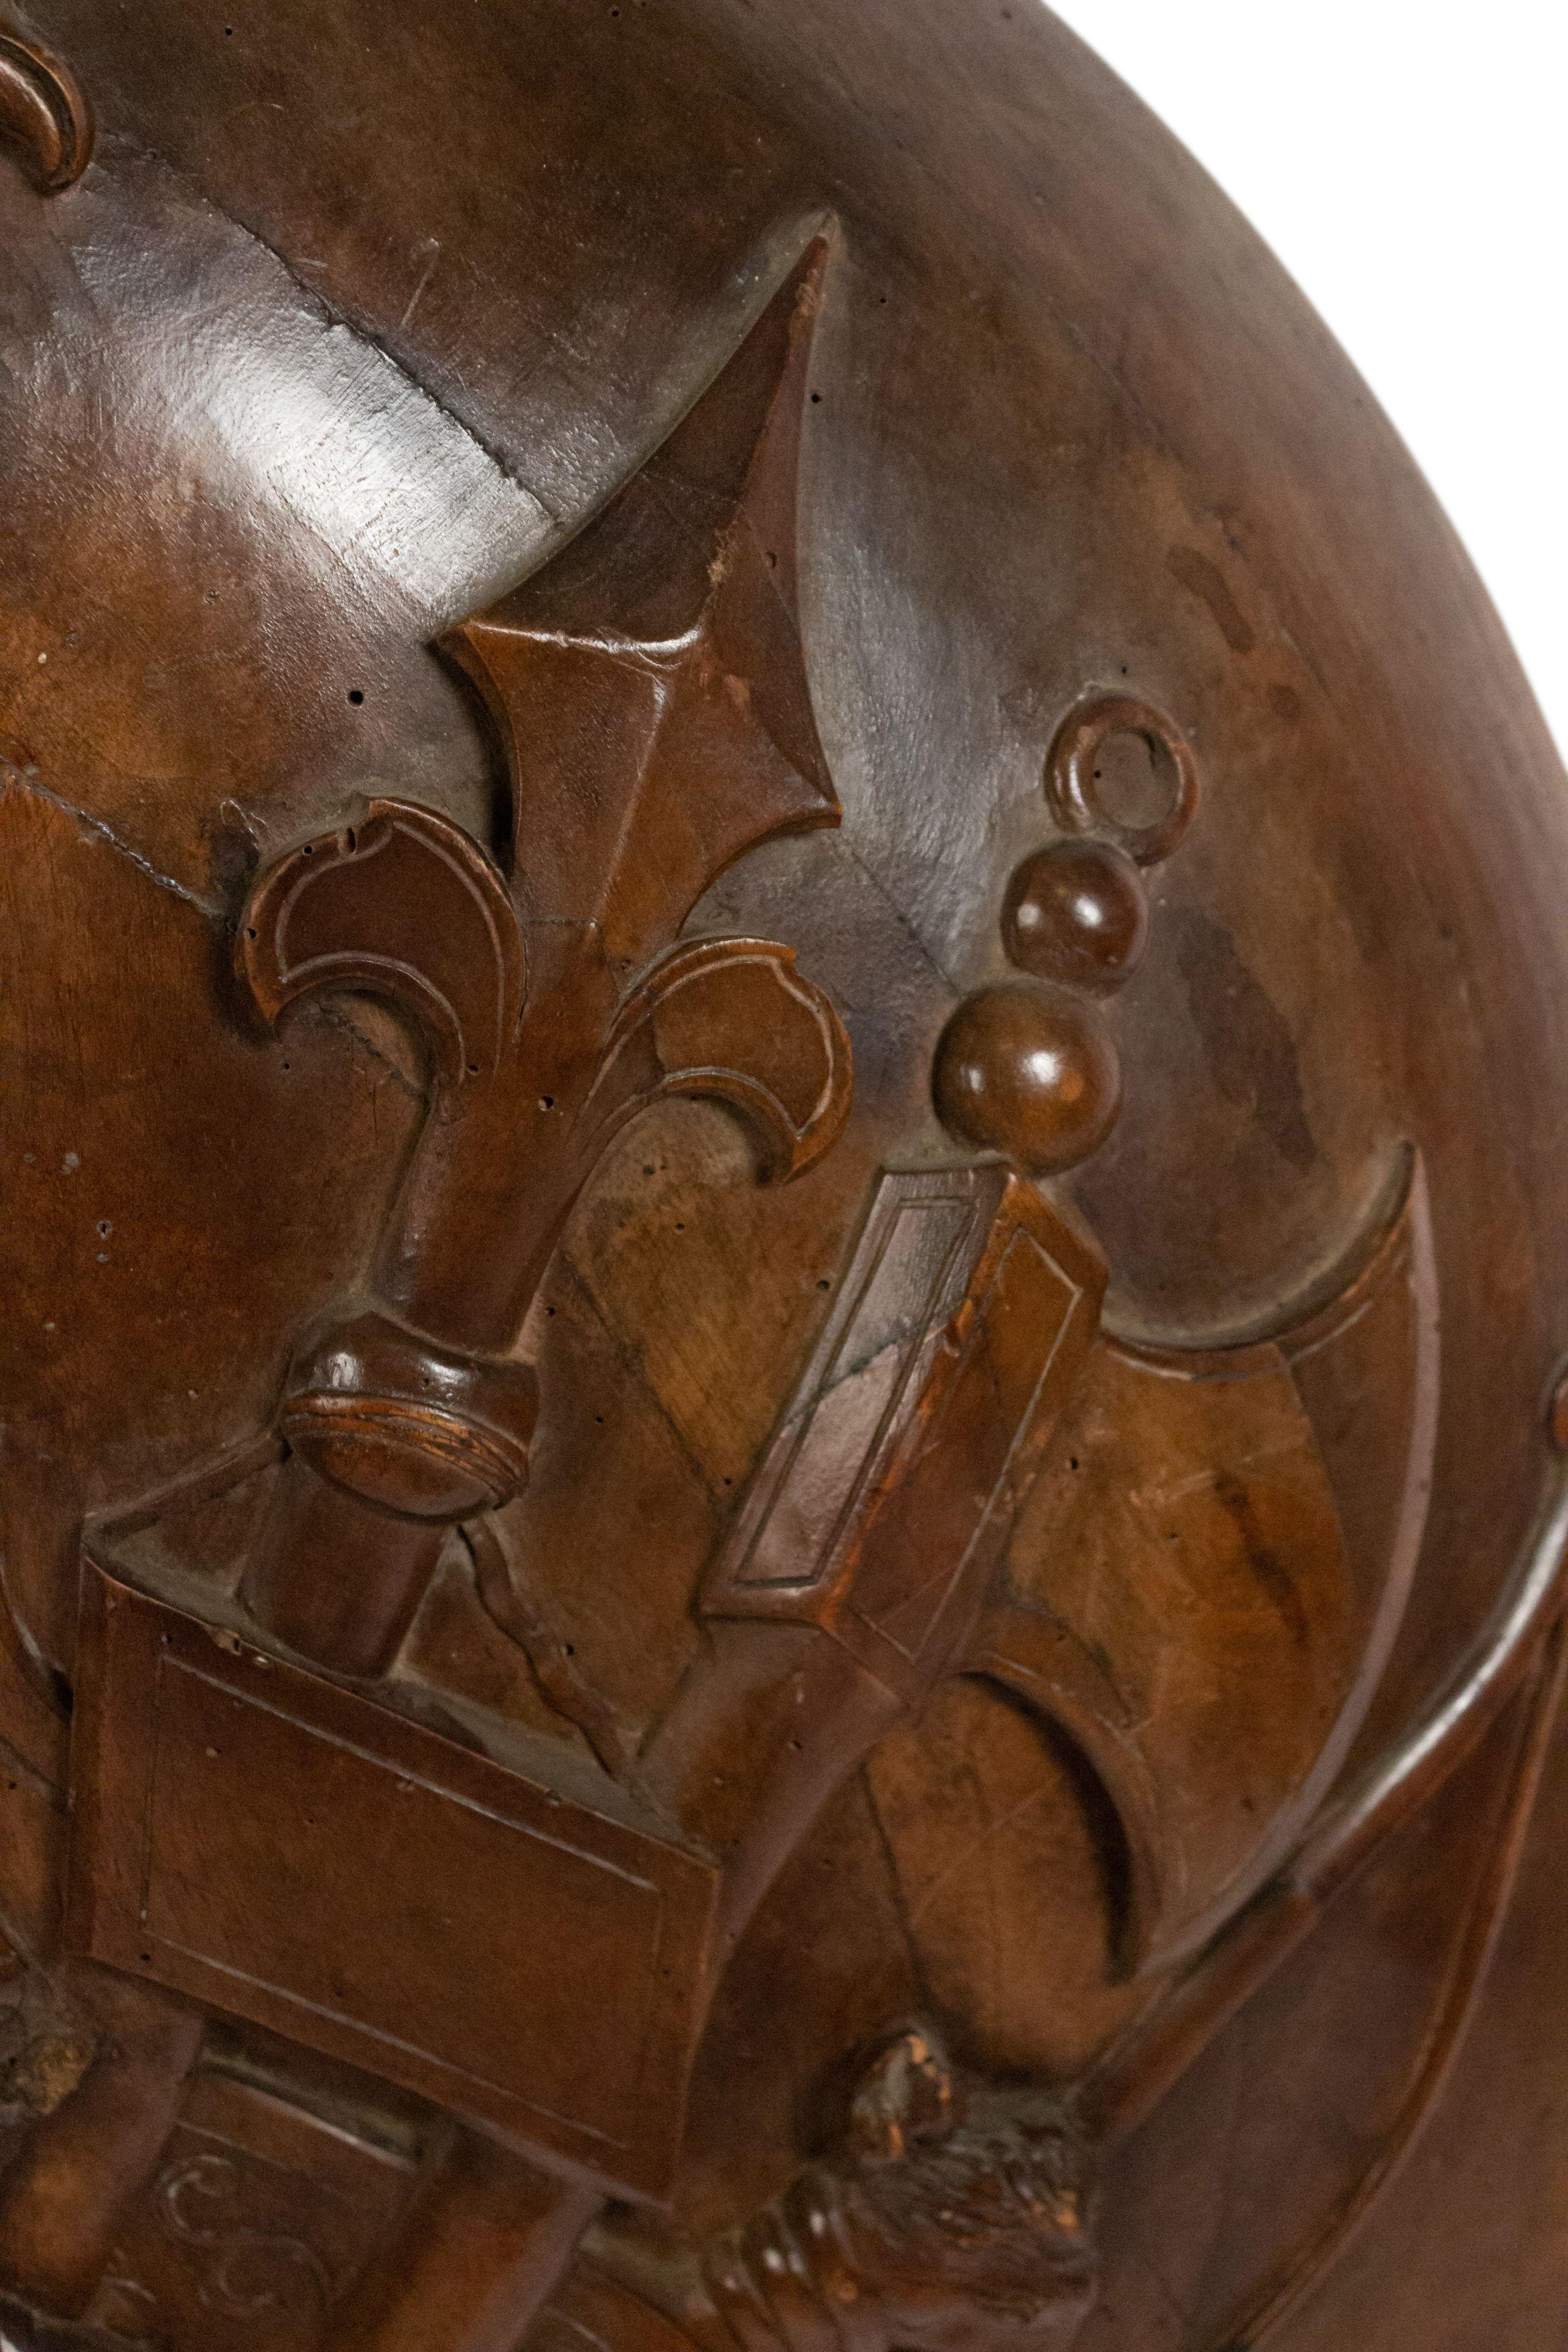 English Renaissance style (18/19th Century) round shaped walnut wall plaque with military motif of spears and armor in relief.